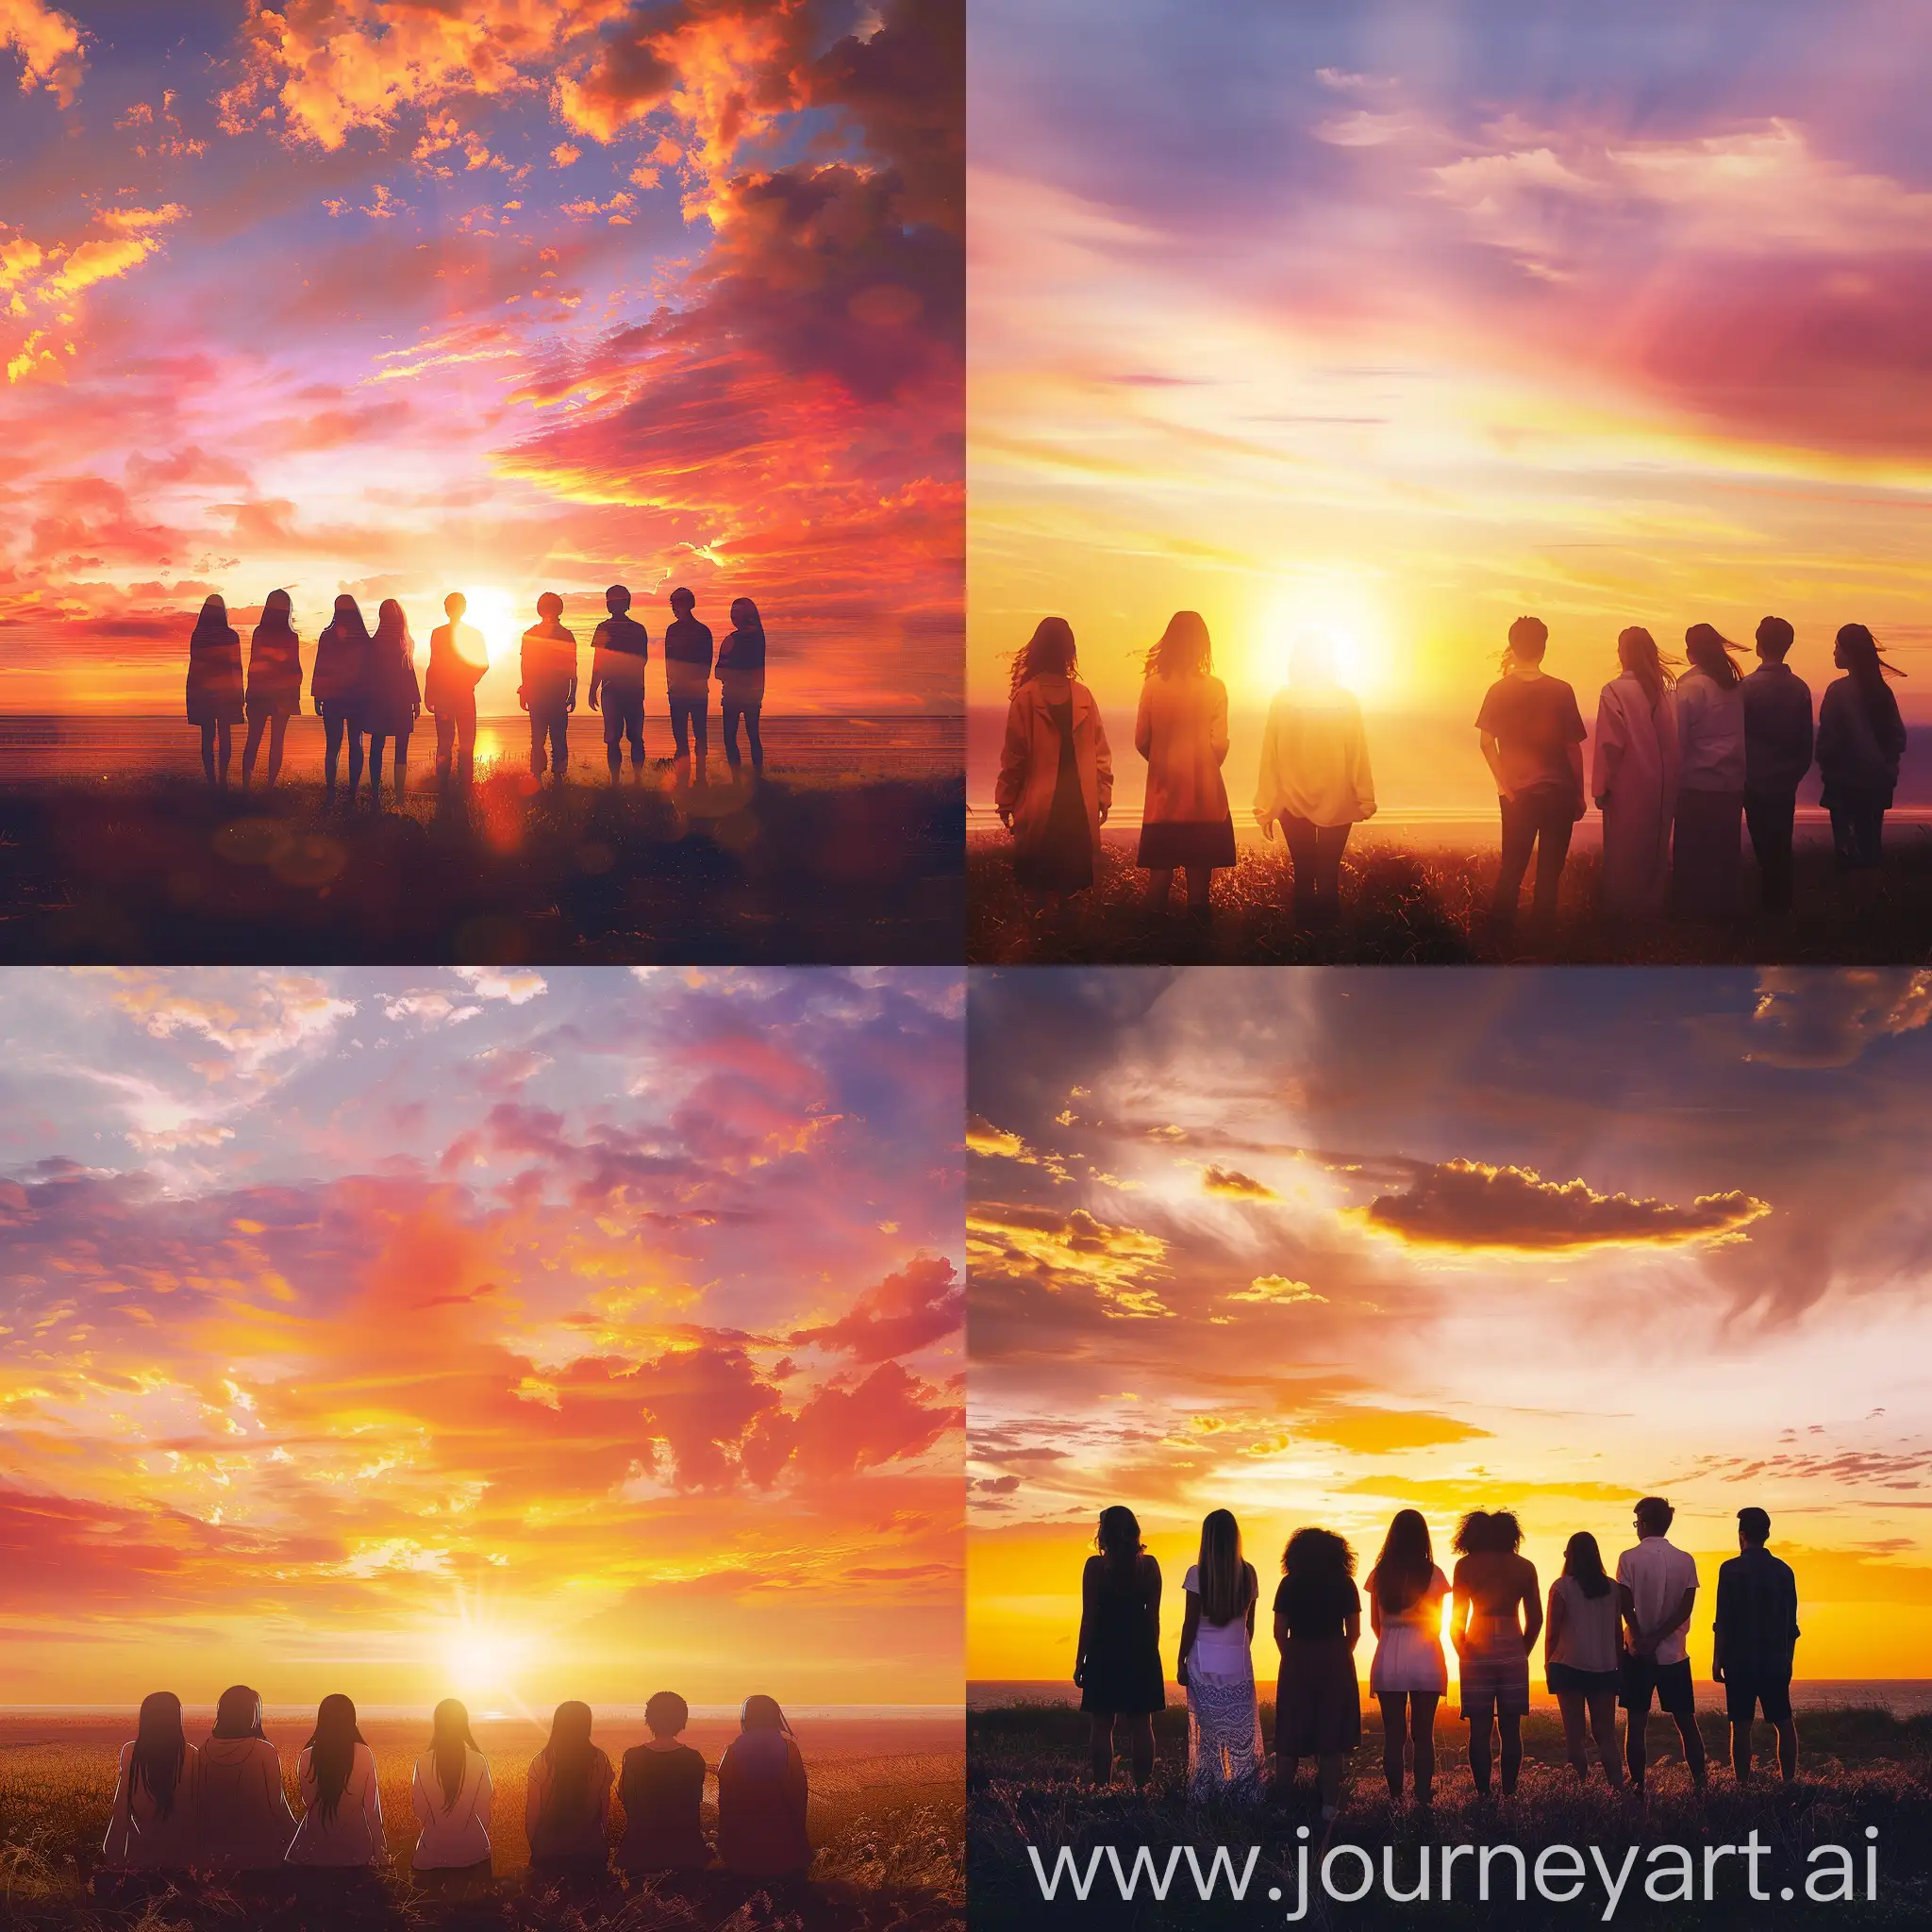 Visualize a serene scene capturing a poignant moment of connection and reflection. In the foreground, a group of eight friends is standing together, looking towards a breathtaking sunset. The group is composed of three women and five men, each with their own distinct but harmoniously blended appearances, reflecting a range of emotions and relationships. The women are on the left side, each embodying grace, thoughtfulness, and joy. The men are spread out to the right, showing a mix of contemplation, solidarity, and optimism.  They are silhouetted against the vibrant backdrop of the setting sun, which bathes the scene in a warm, golden light, painting the sky with shades of orange, pink, and purple. The environment around them is tranquil and vast, suggesting an open field or a quiet beach that emphasizes the moment's introspective nature. This composition not only highlights the beauty of the sunset but also the collective and individual journeys of the characters, symbolizing endings, beginnings, and the enduring strength of their bonds.  The image should capture the essence of farewell and hope, embodying the emotional depth and the unique dynamics of the group’s friendship. The focus is on the group's interaction with the environment and each other, portraying a shared experience that is both personal and universal.